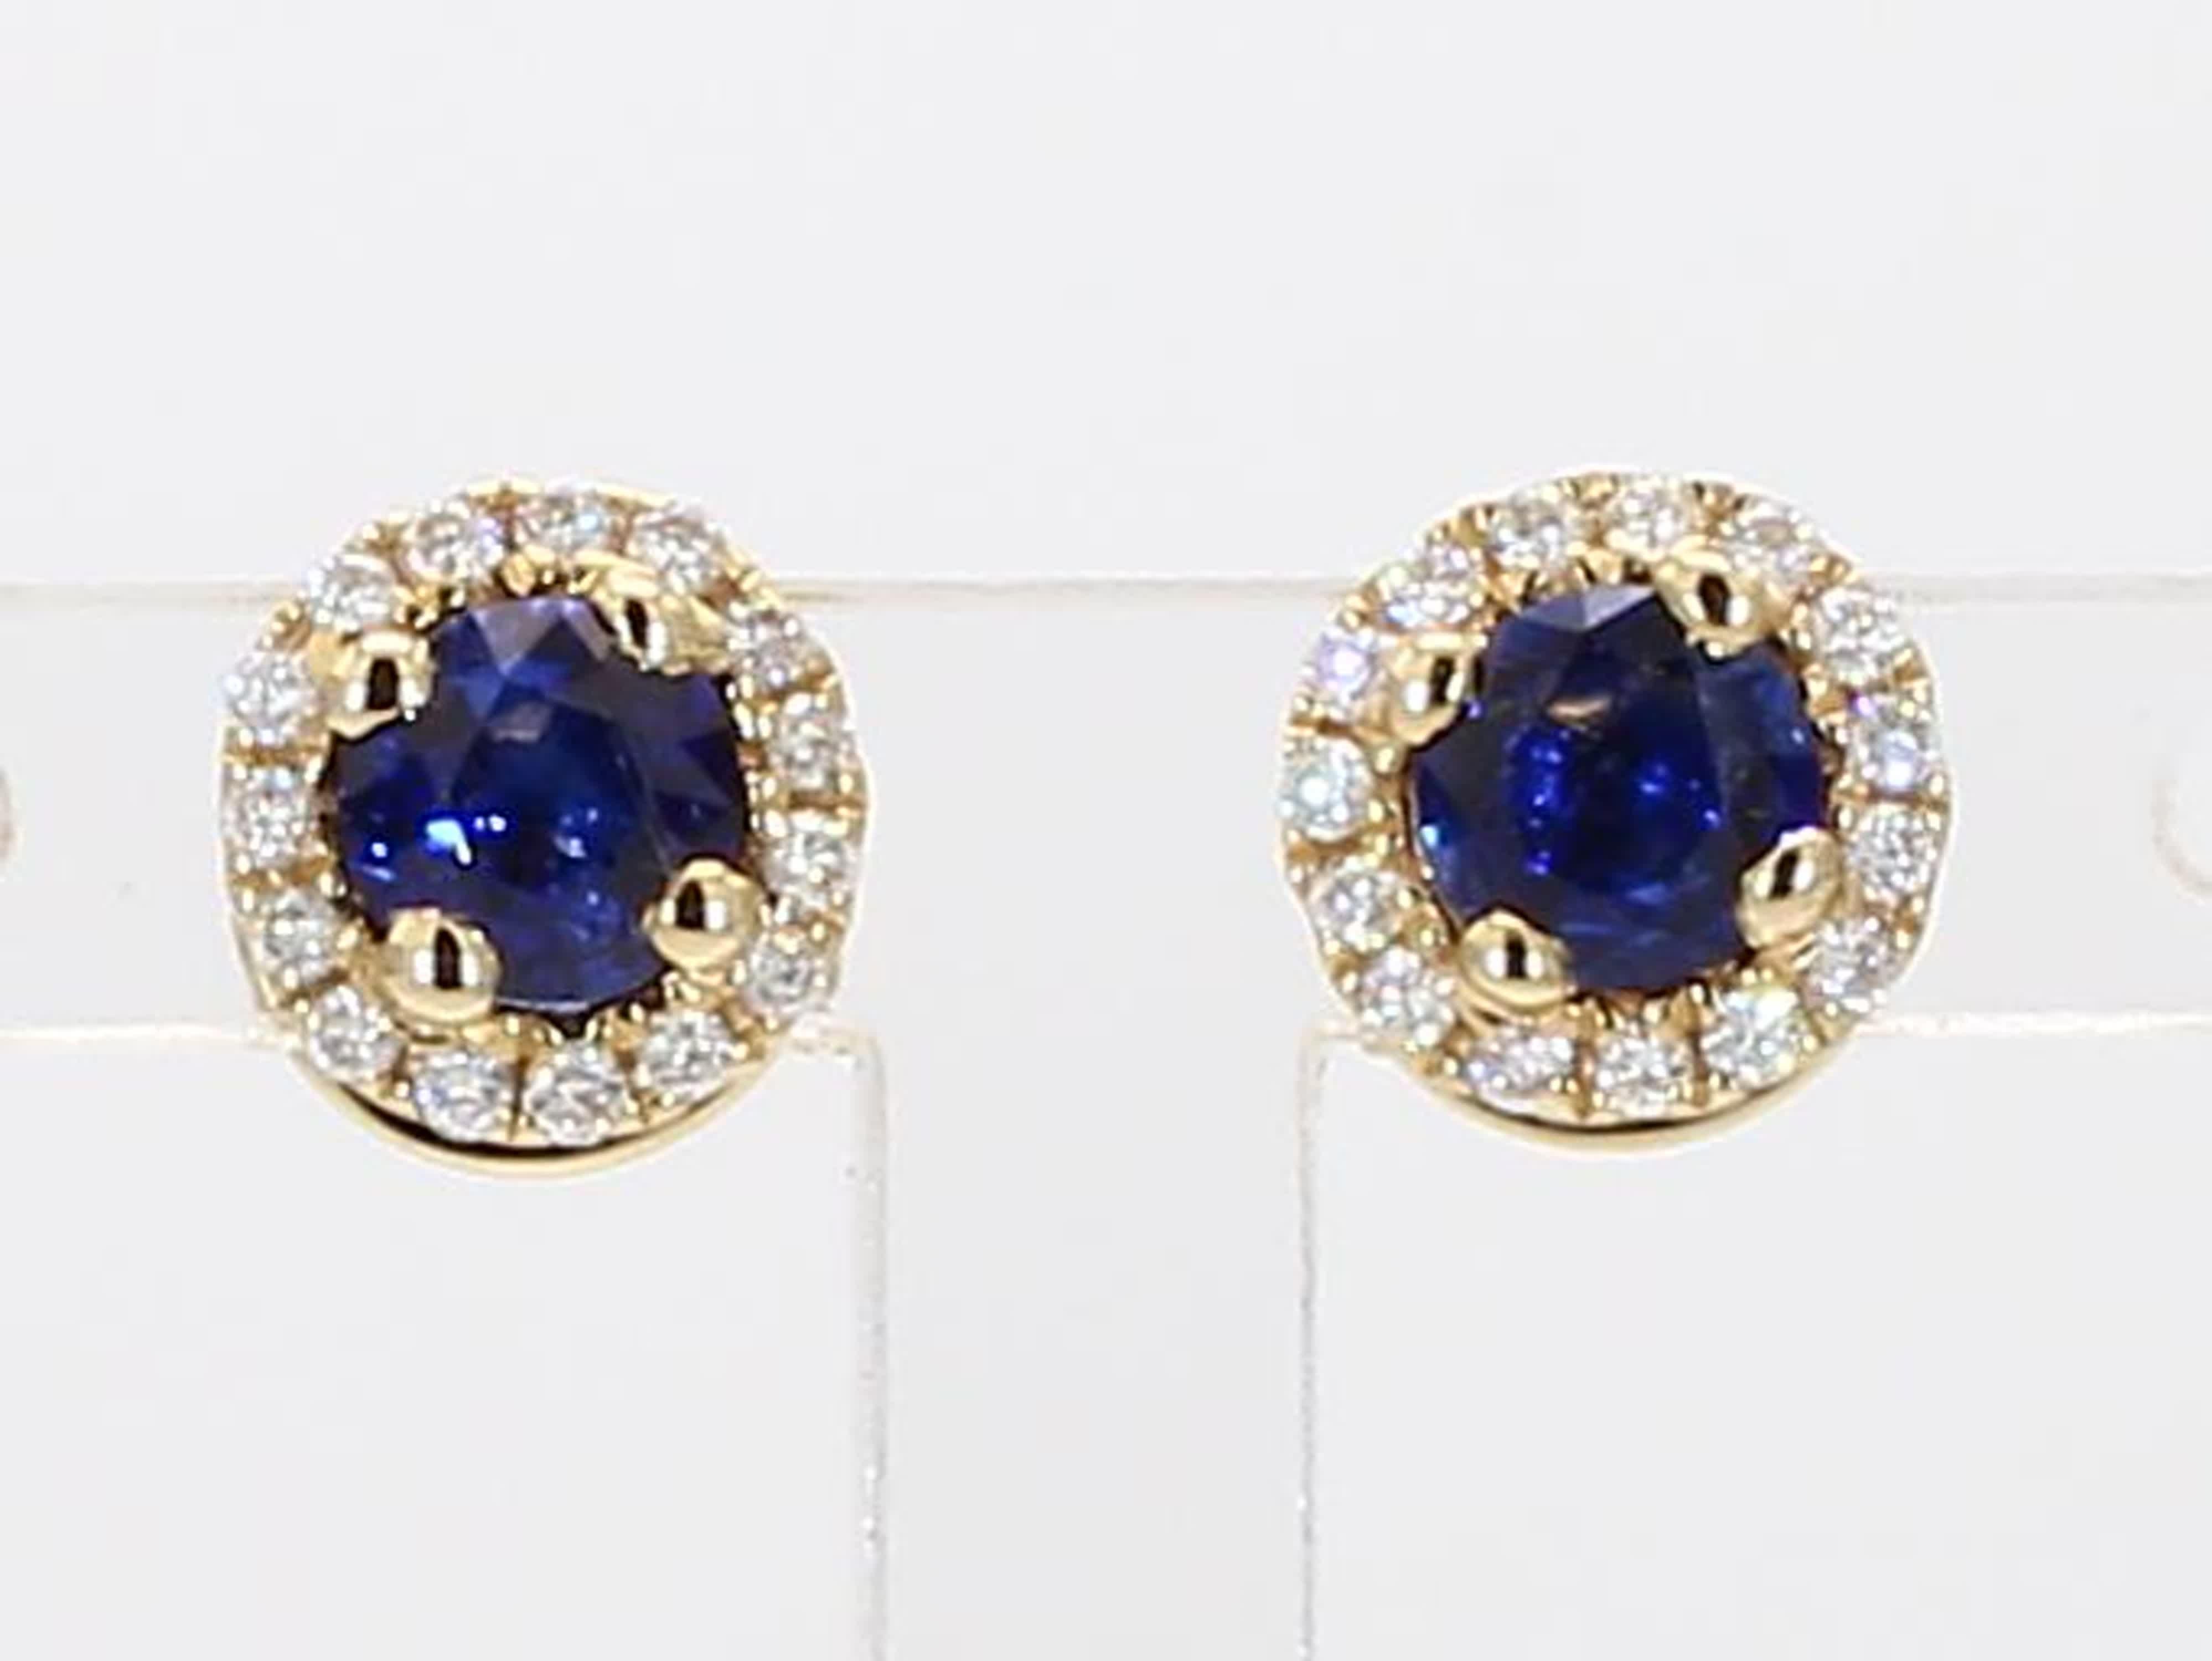 RareGemWorld's classic sapphire earrings. Mounted in a beautiful 14K Yellow Gold setting with natural round cut blue sapphires. The sapphires are surrounded by natural round white diamond melee in a beautiful single halo. These earrings are